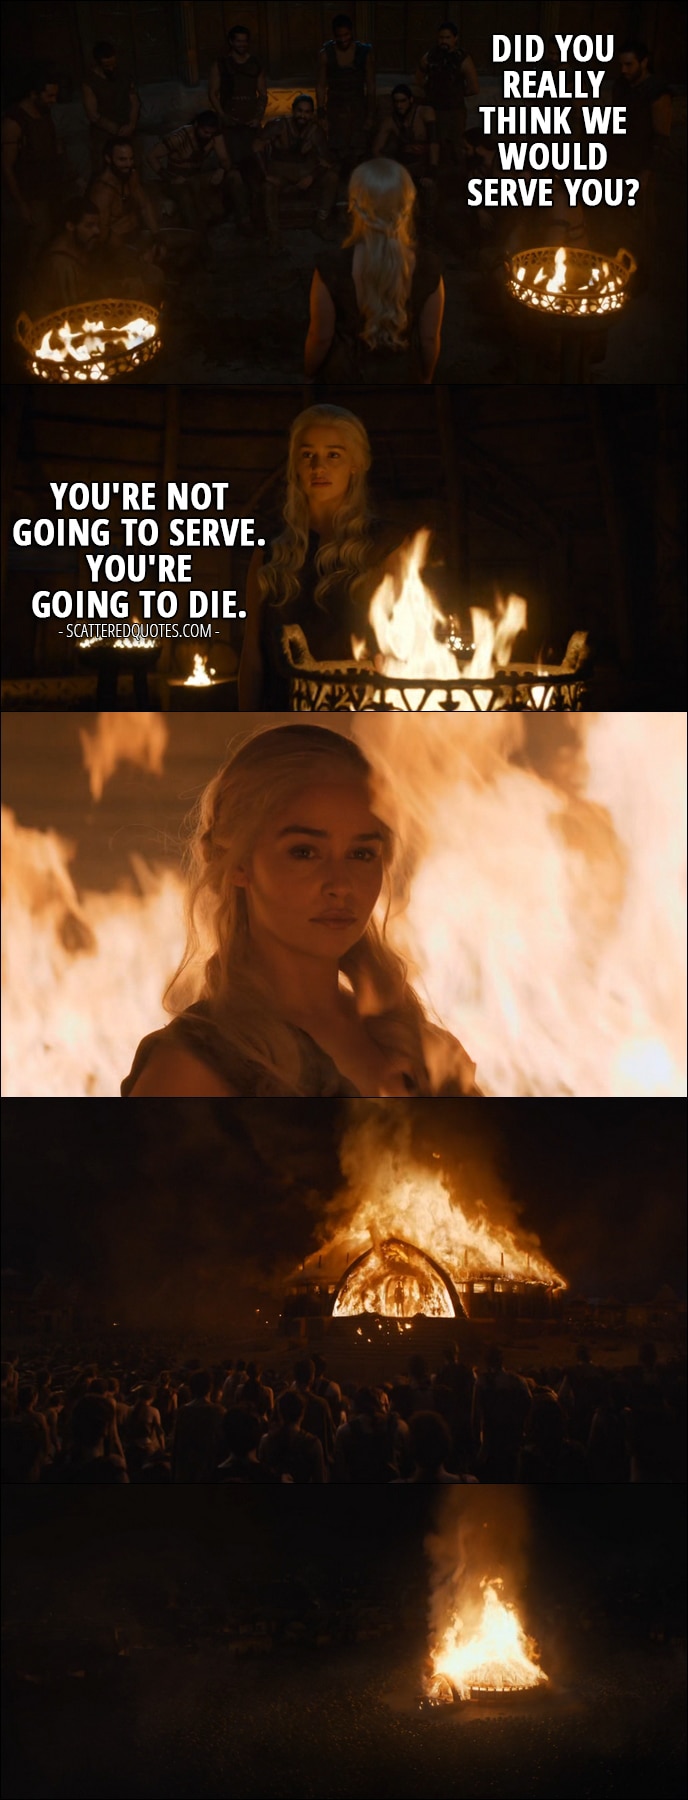 Quote from Game of Thrones 6x04 - Khal Moro: Did you really think we would serve you? Daenerys Targaryen: You're not going to serve. You're going to die.